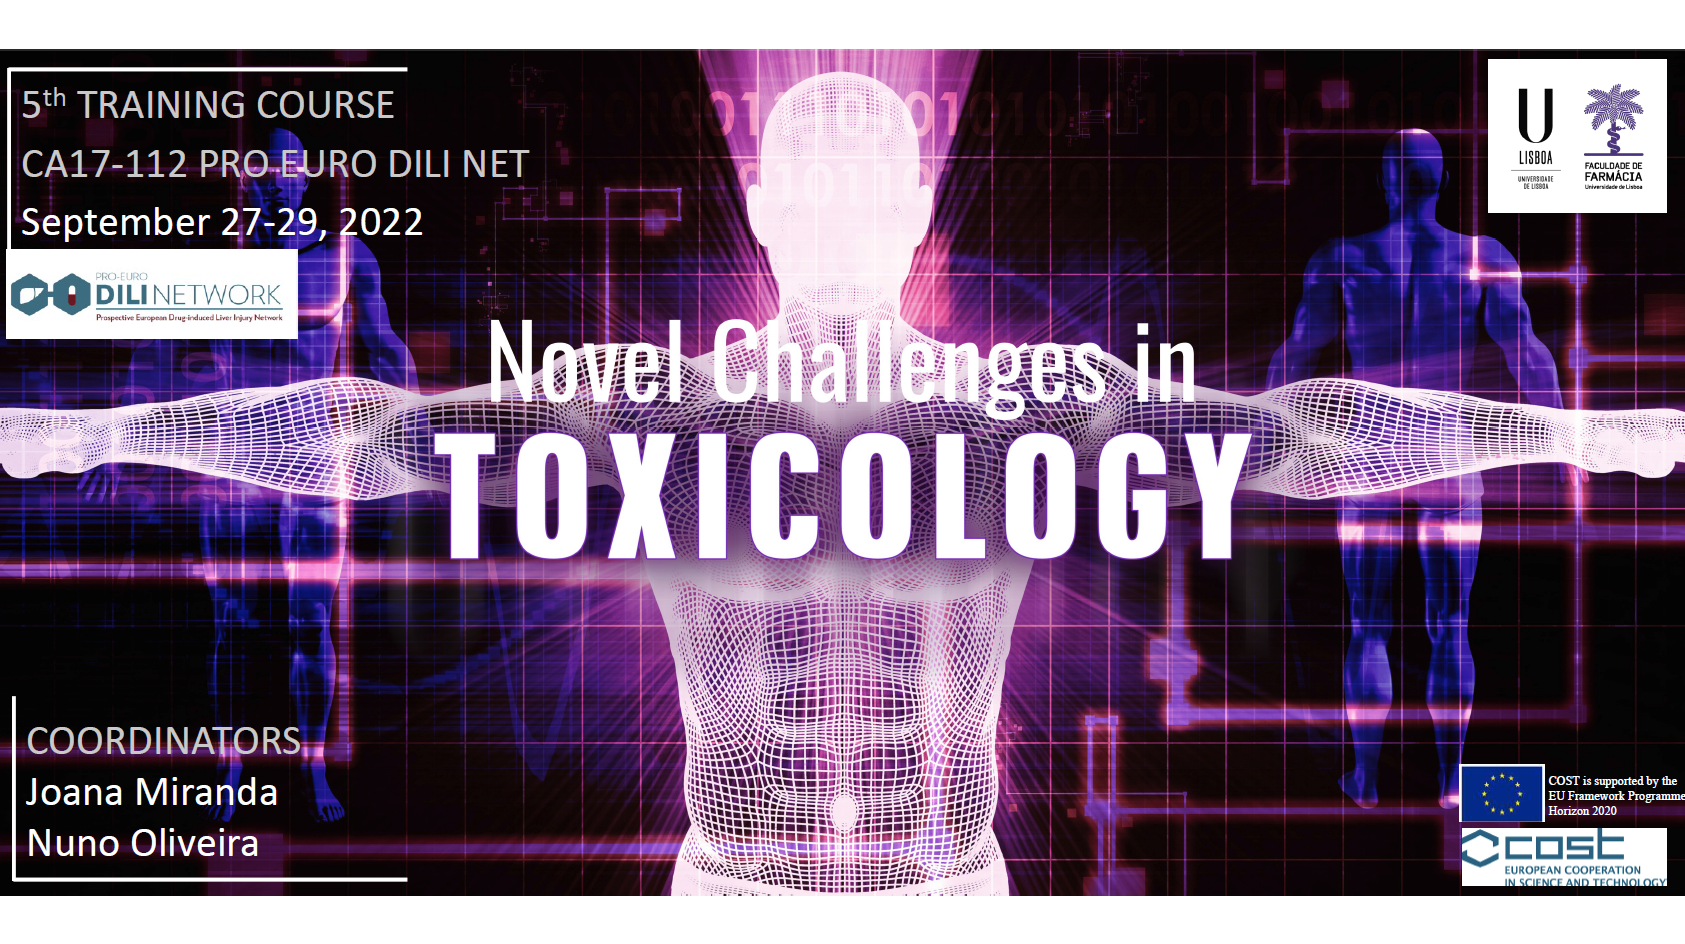 5th TRAINING COURSE, CA17-112 PRO EURO DILI NET | Novel Challenges in Toxicology